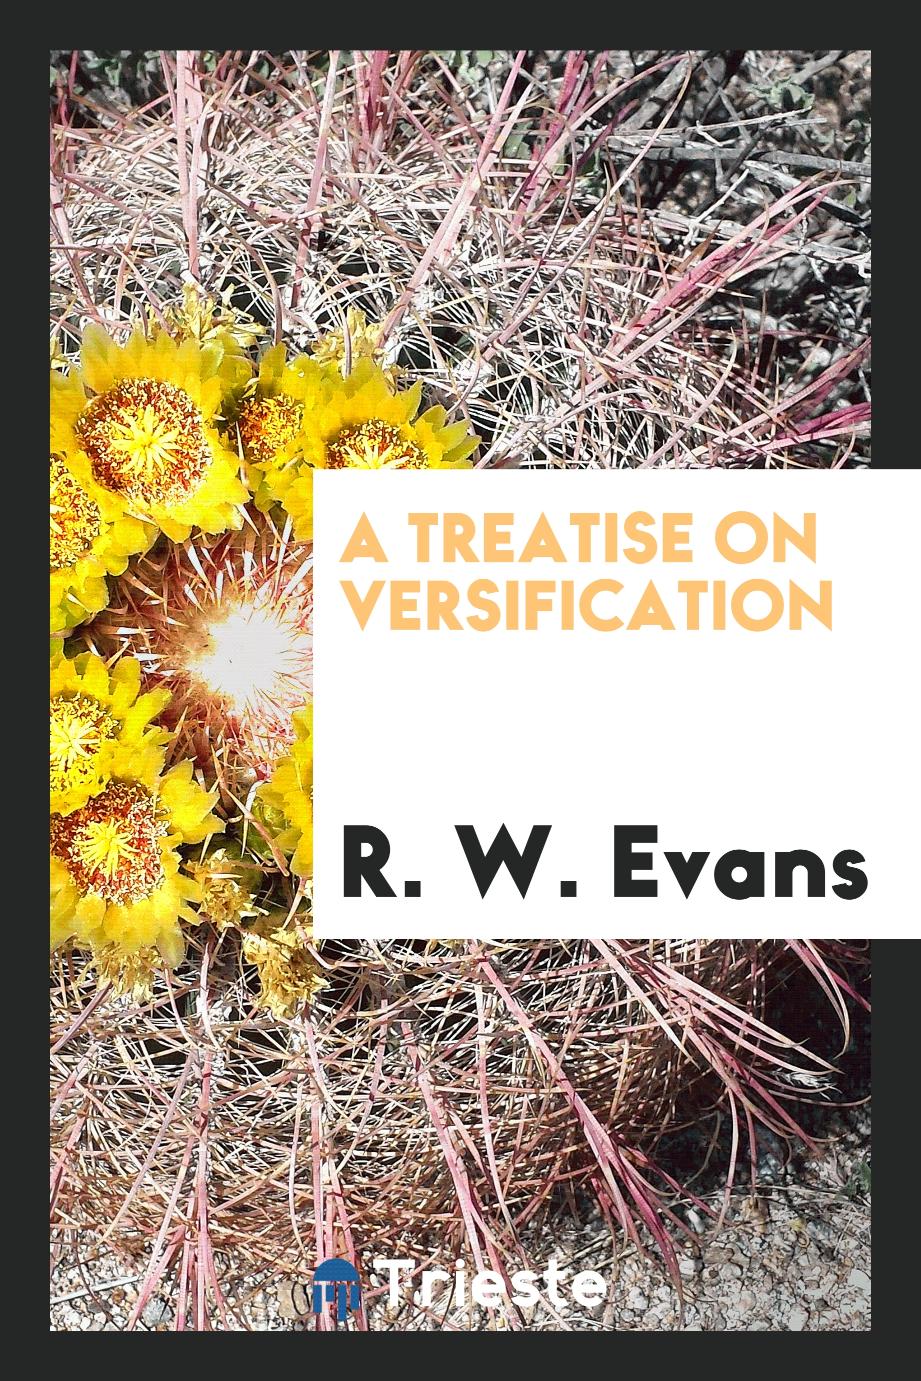 R. W. Evans - A Treatise on Versification